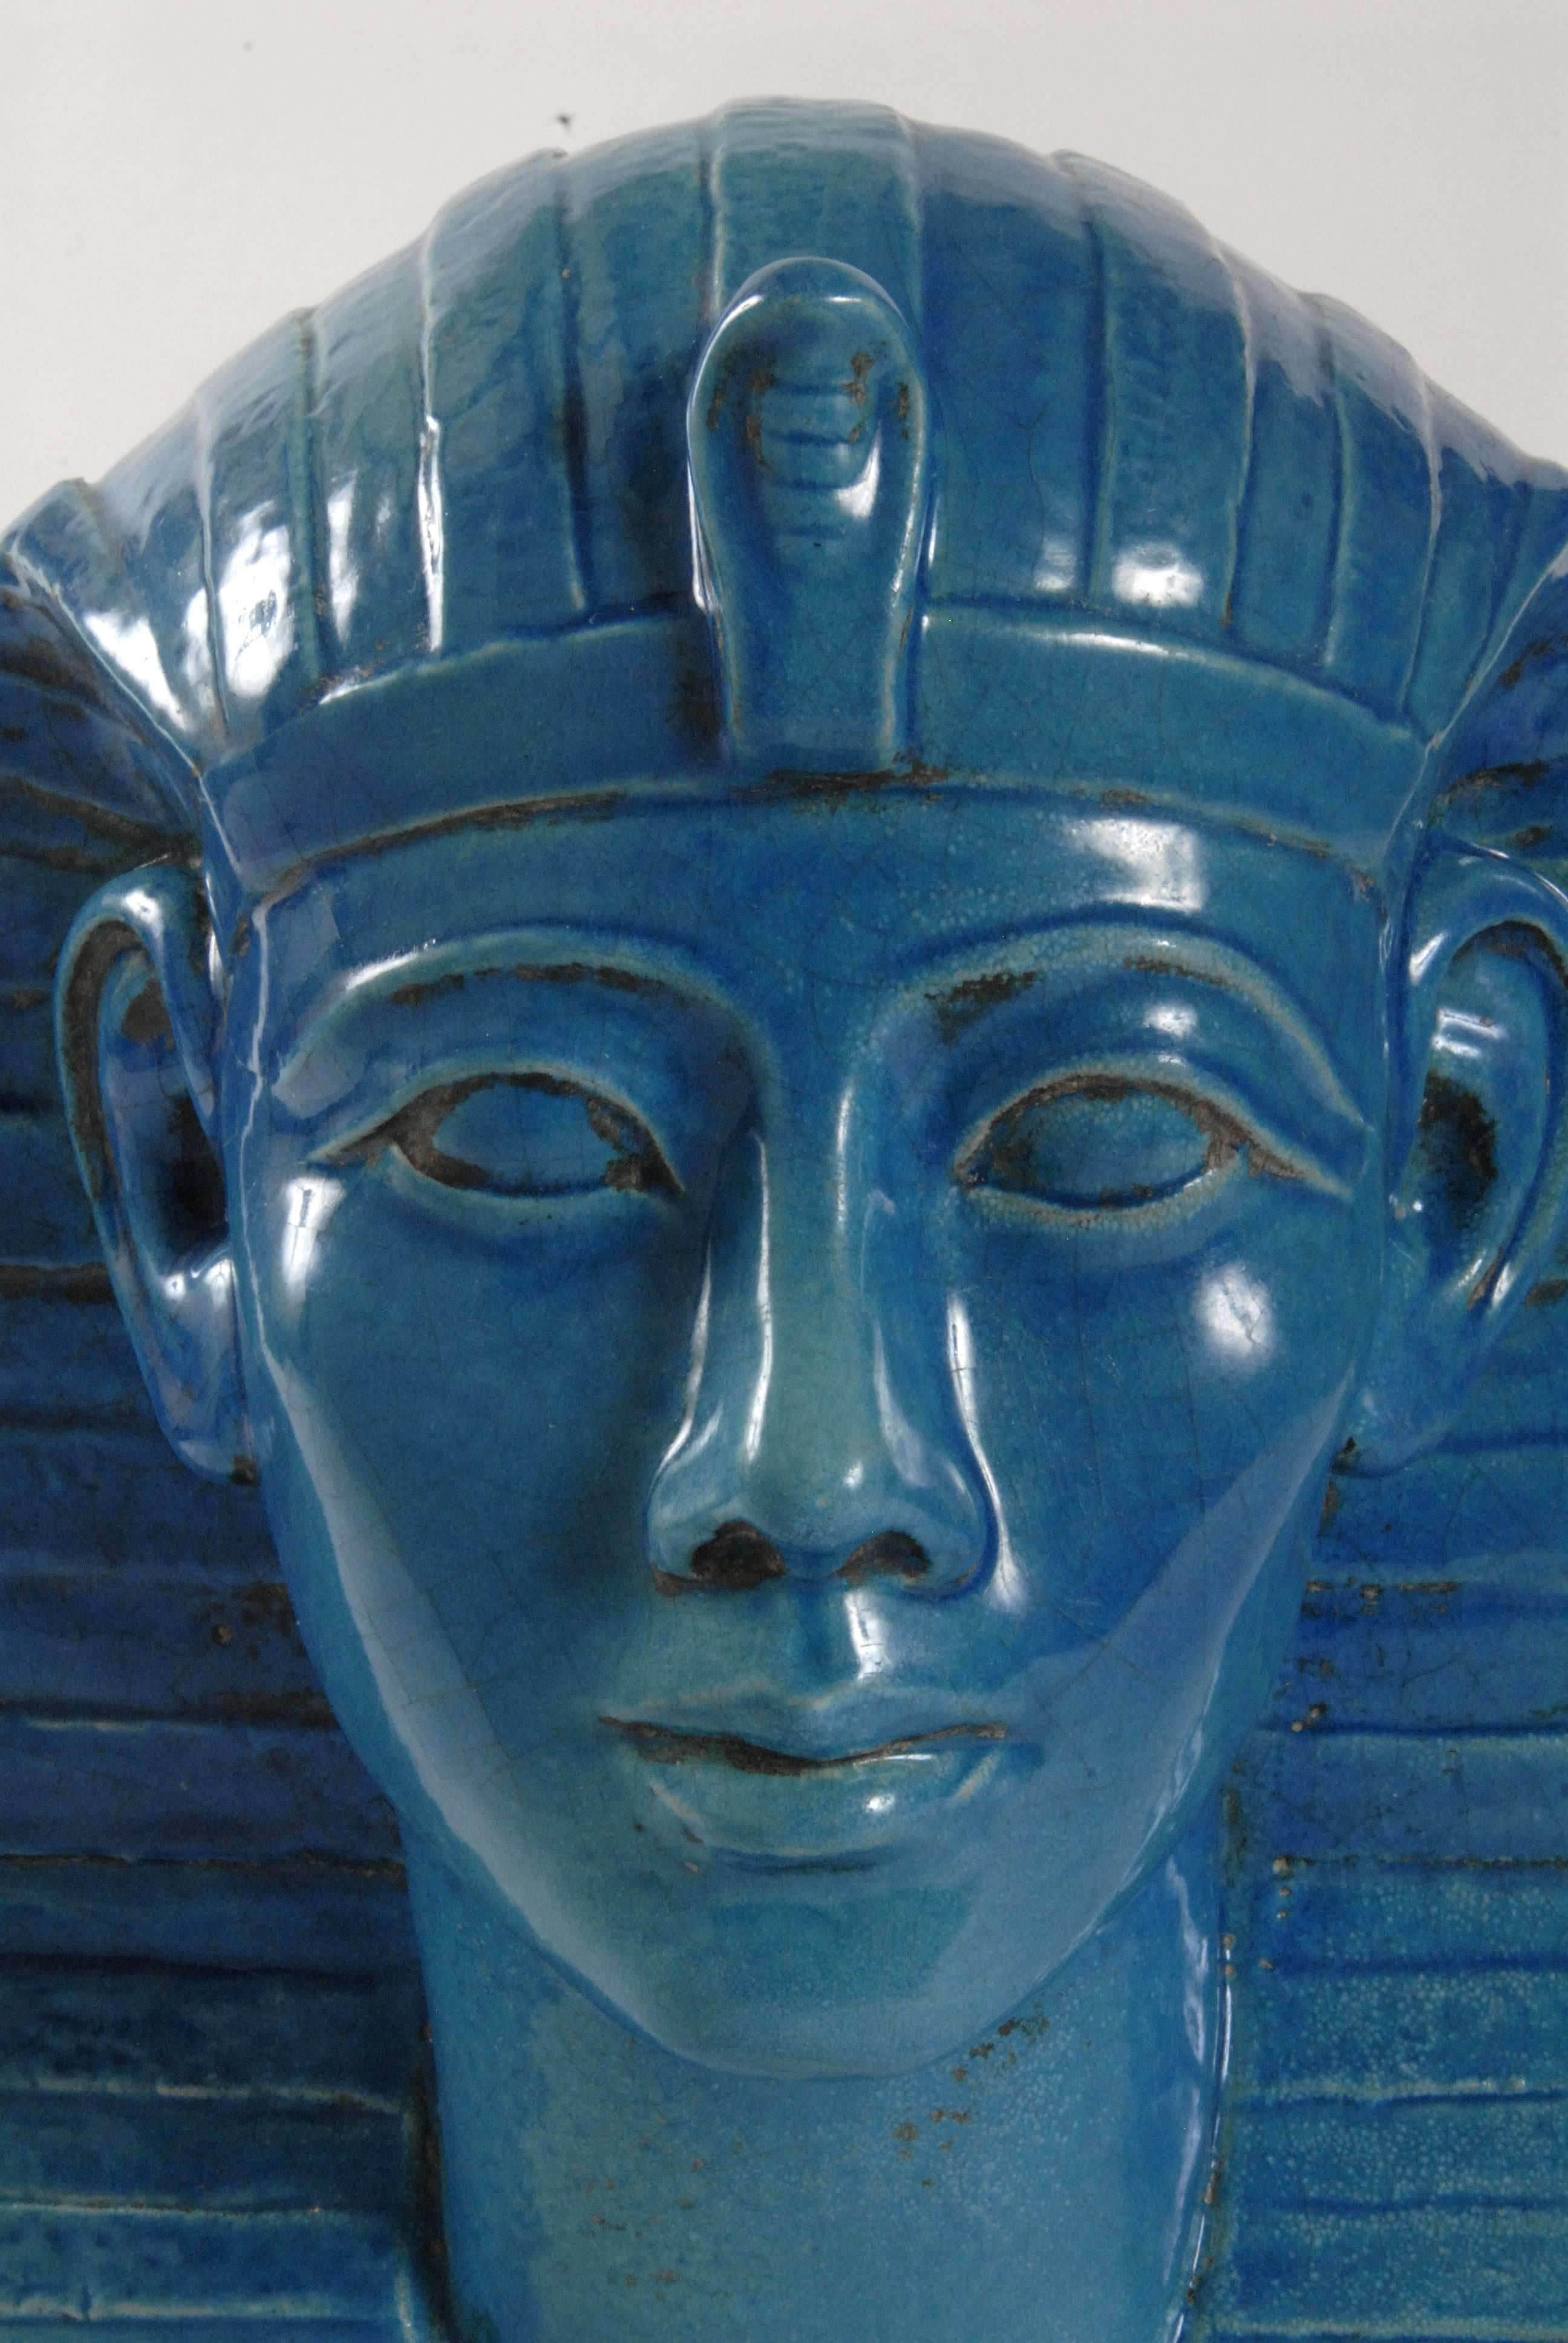 A large pharaoh's head, reminiscent of Tutankhamun, made by Zaccagnini in the 50's and signed on the base. The brilliant turquoise glaze is luminous with great depth. In exceptional condition.